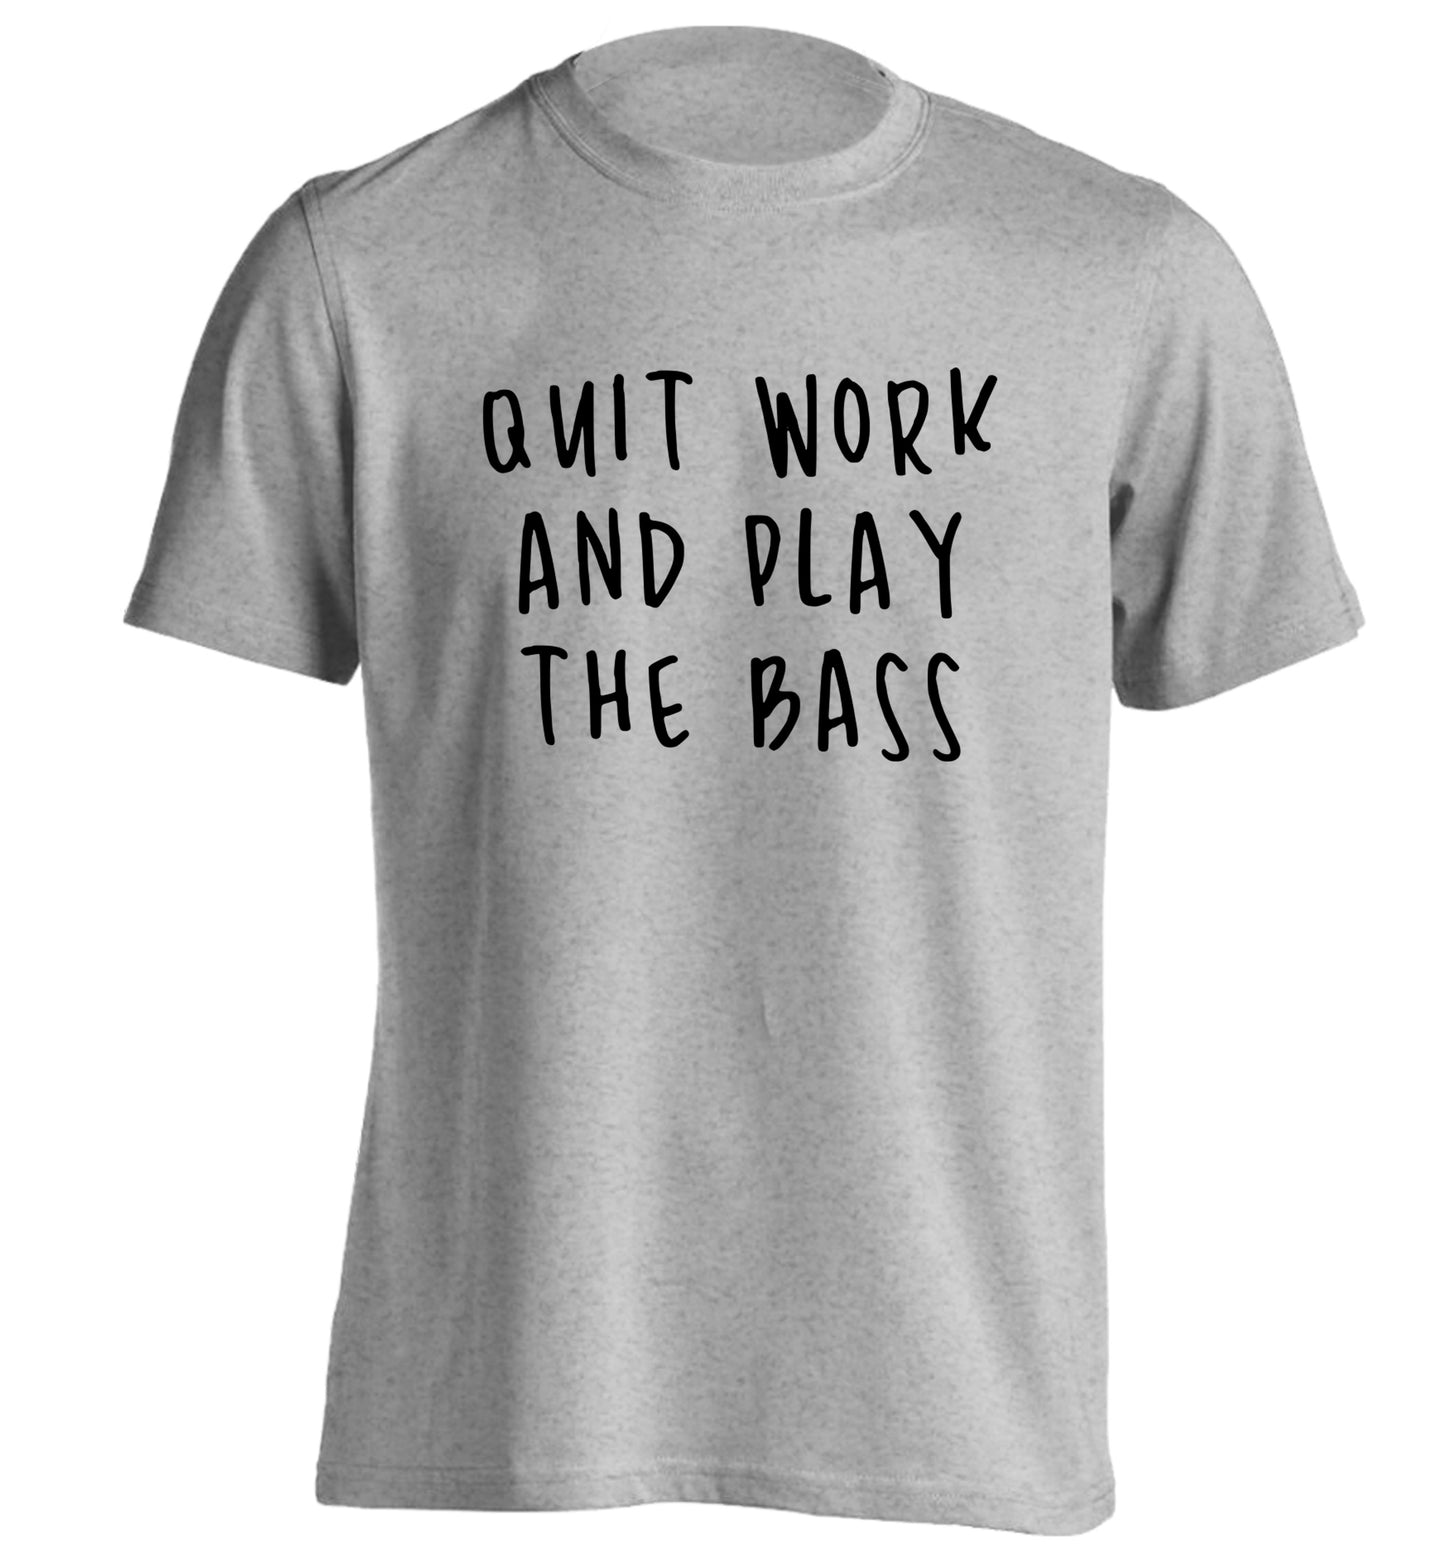 Quit work and play the bass adults unisex grey Tshirt 2XL